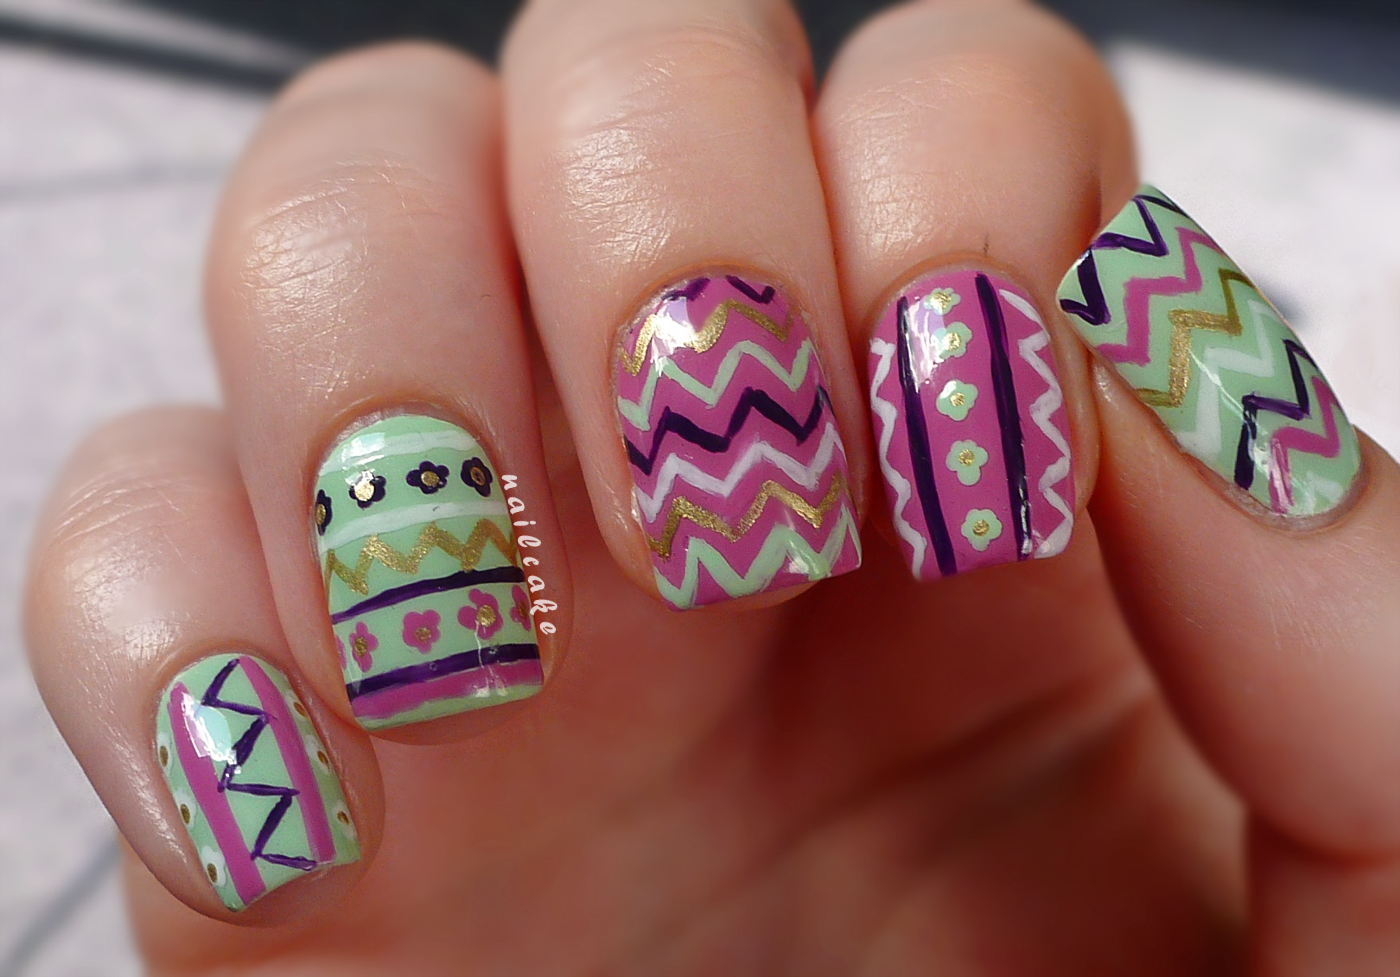 Zig Zag Nails with Designs